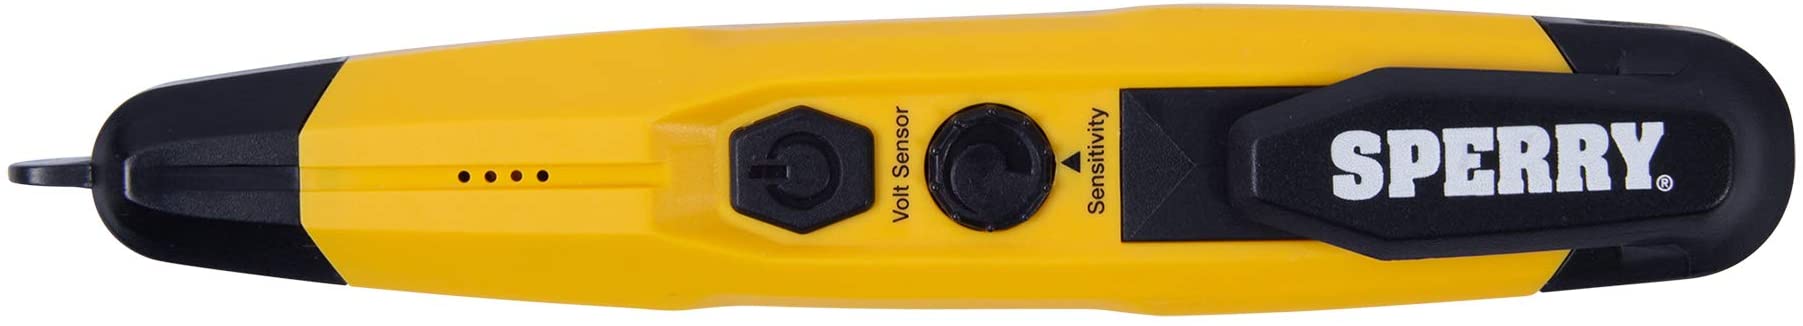 Sperry Instruments VD6509 Adjustable Non-Contact Detector with Flashlight, cETLus Listed, Lifetime Warranty, 1, 5 Clams/Master Voltage Tester, Yellow